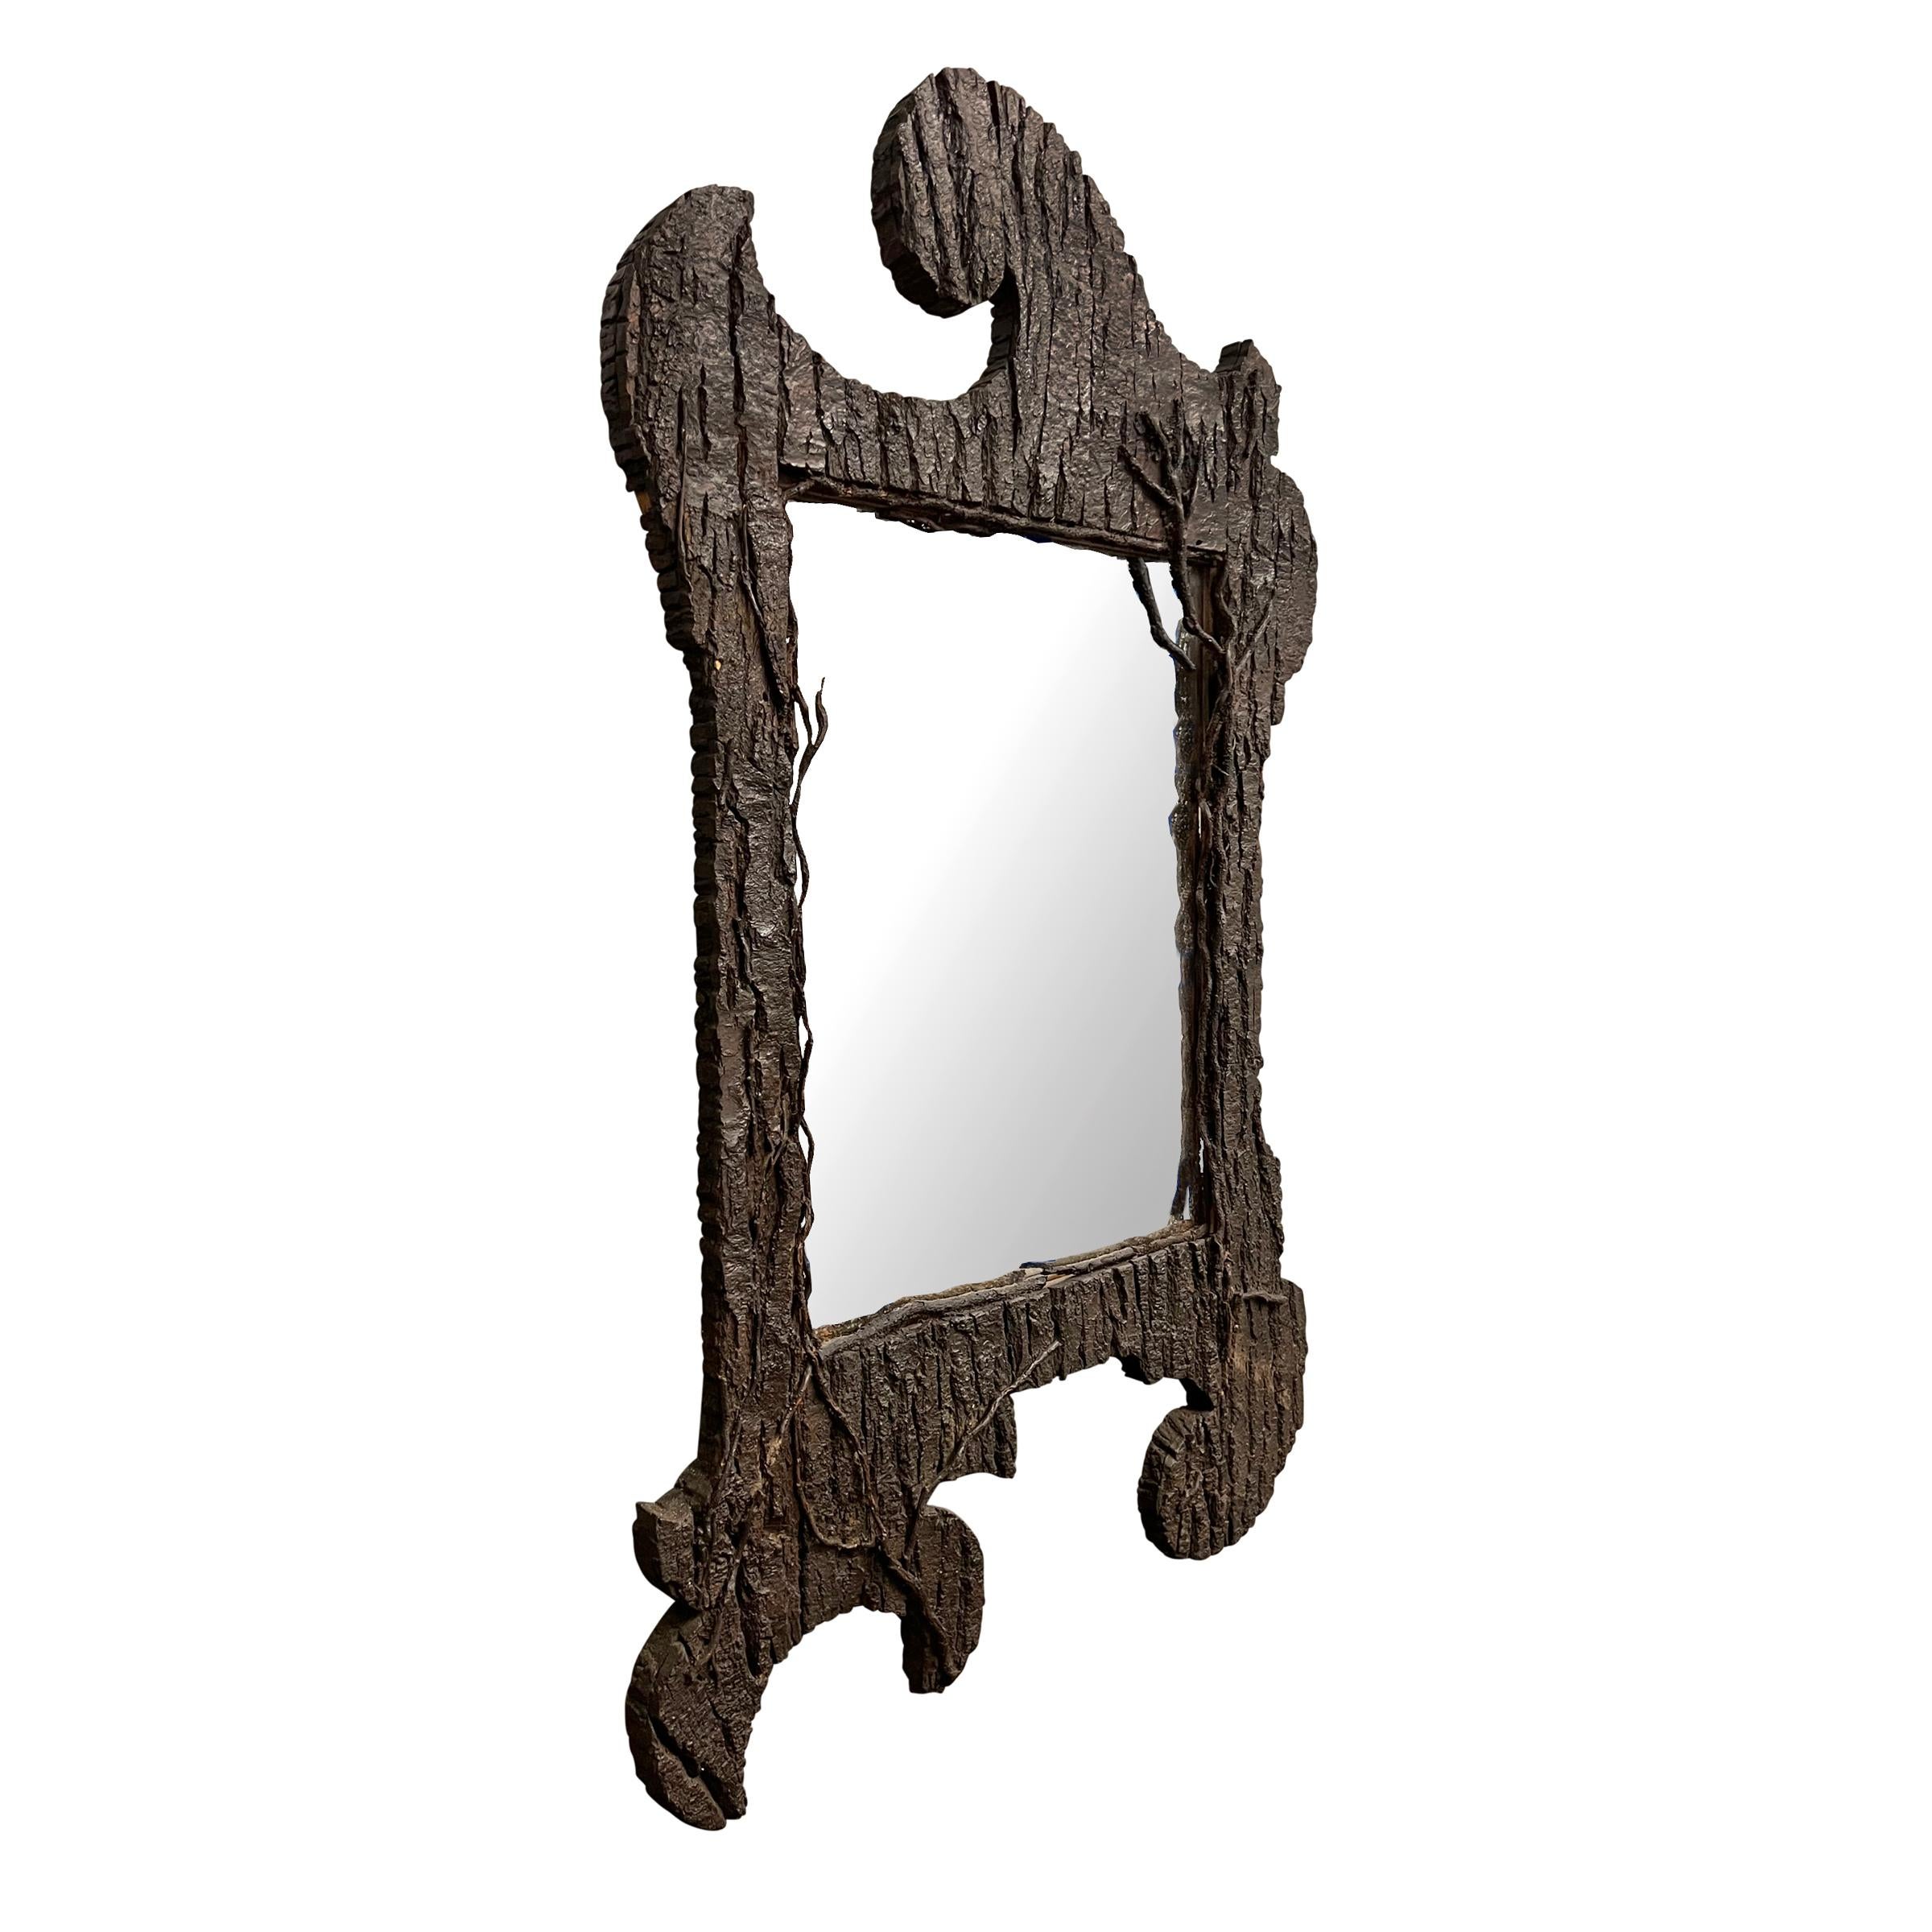 Rustic Early 20th Century Italian Bark Framed Mirror from a Tyrolean Chalet